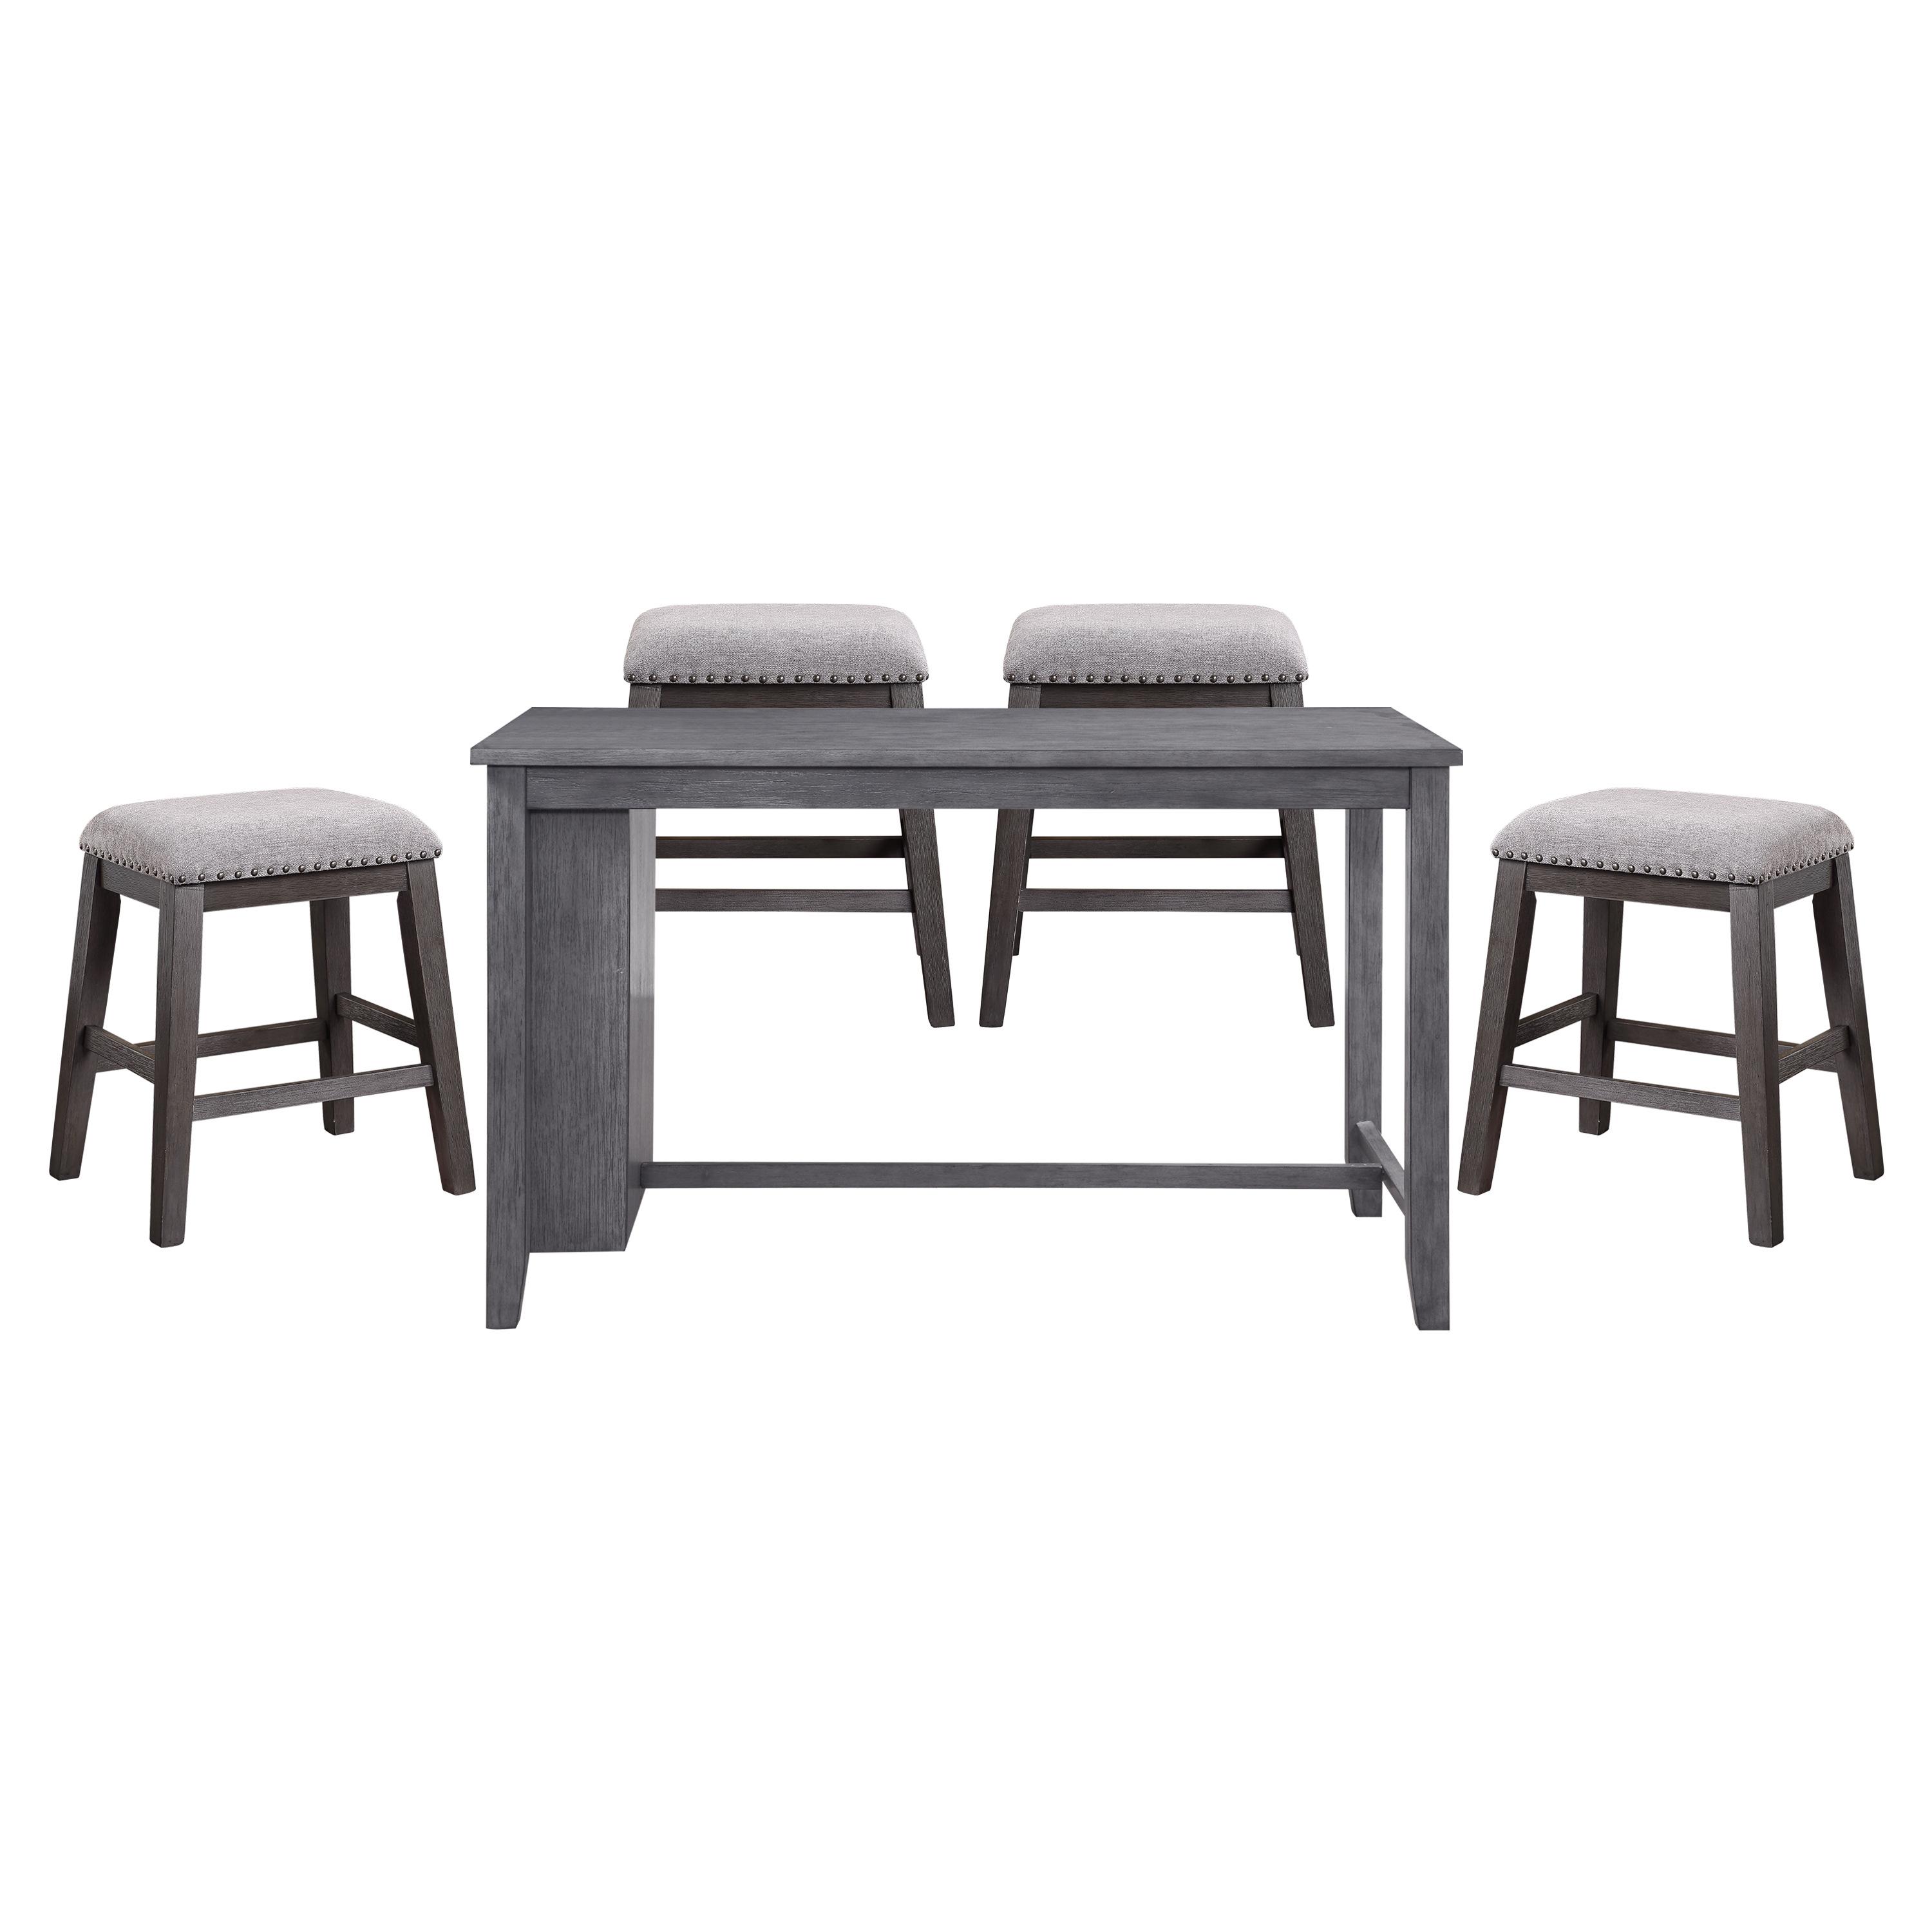 Transitional Dining Room Set 5603-36*5PC Timbre 5603-36*5PC in Gray Chenille